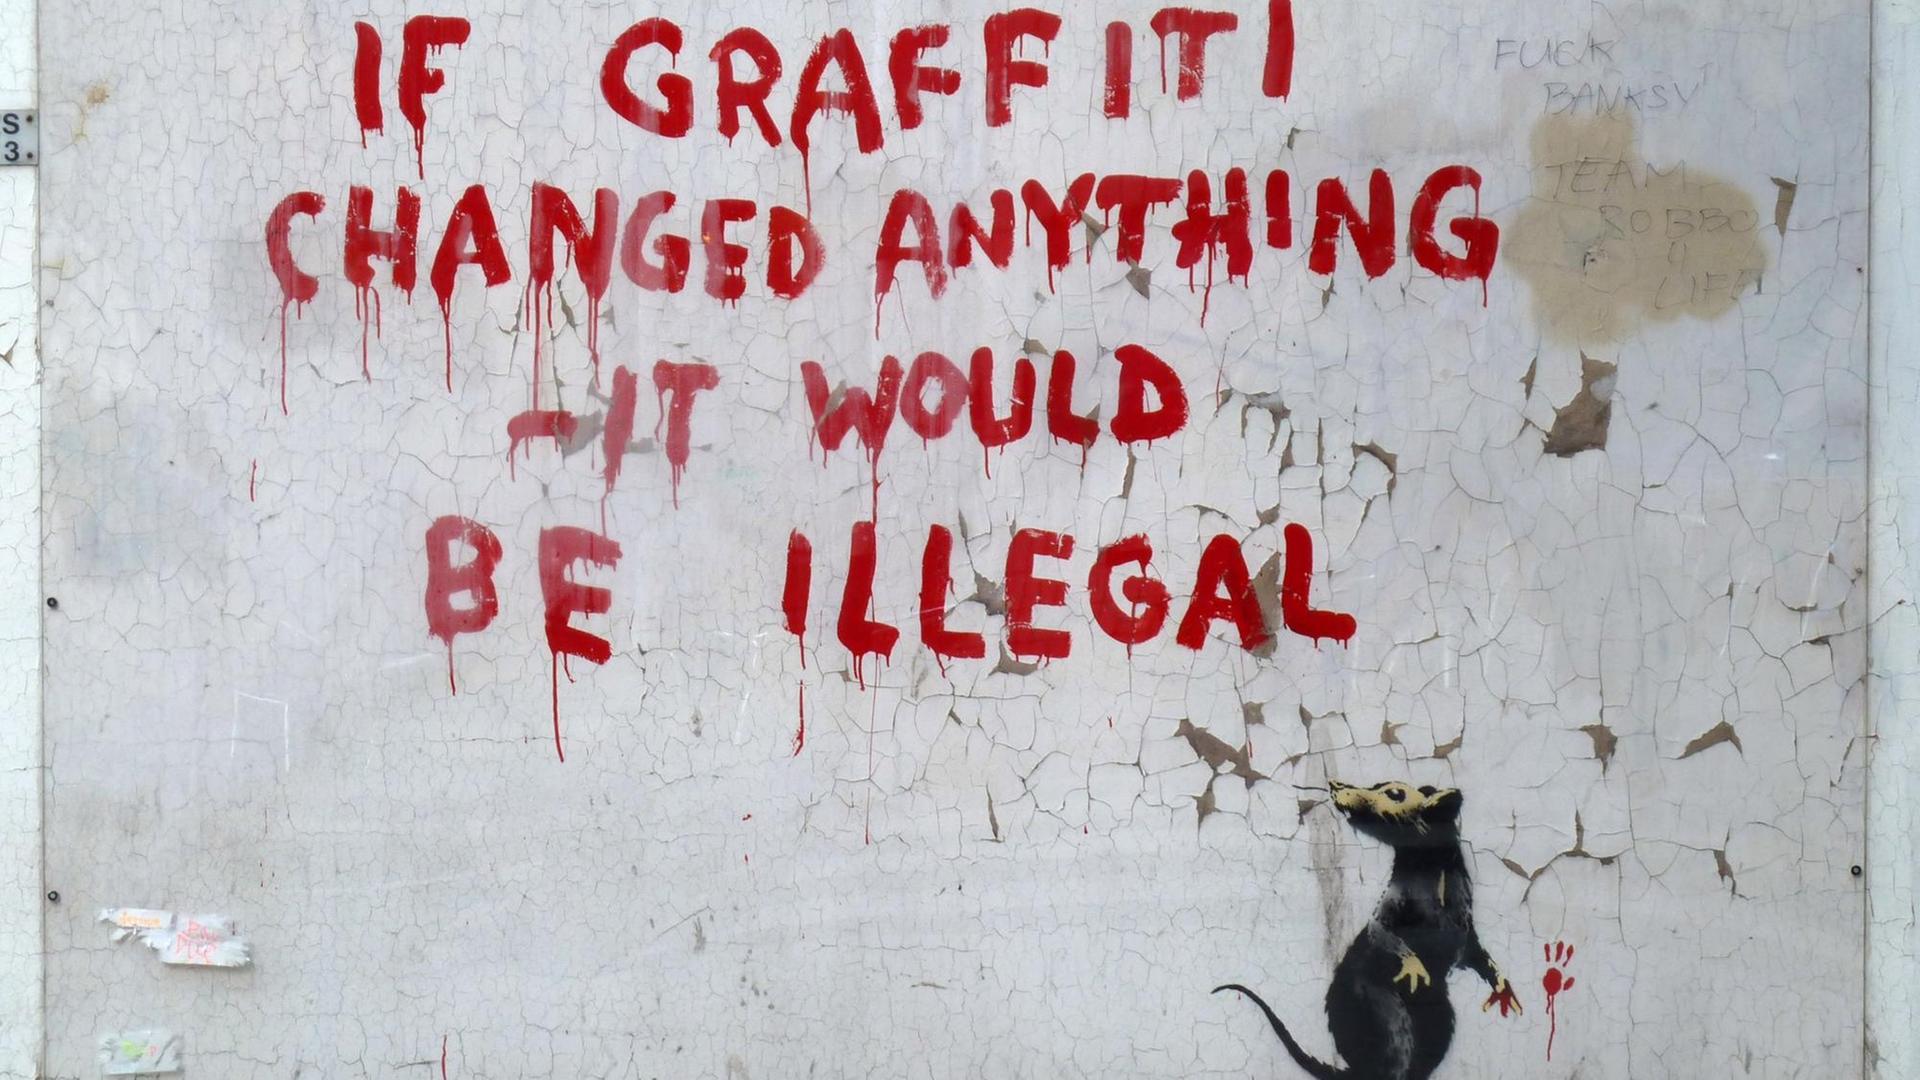 LONDON, ENGLAND - OCTOBER 6: A new stencil and spray paint artwork, by guerilla graffiti artist Banksy, appears in Fitzrovia, October 6, 2011 in London, England. The piece, that shows a rat having written a message which reads "If Graffiti changed anything - it would be illegal", has been covered in plexiglass in order to protect it. (Photo by Jim Dyson/Getty Images)